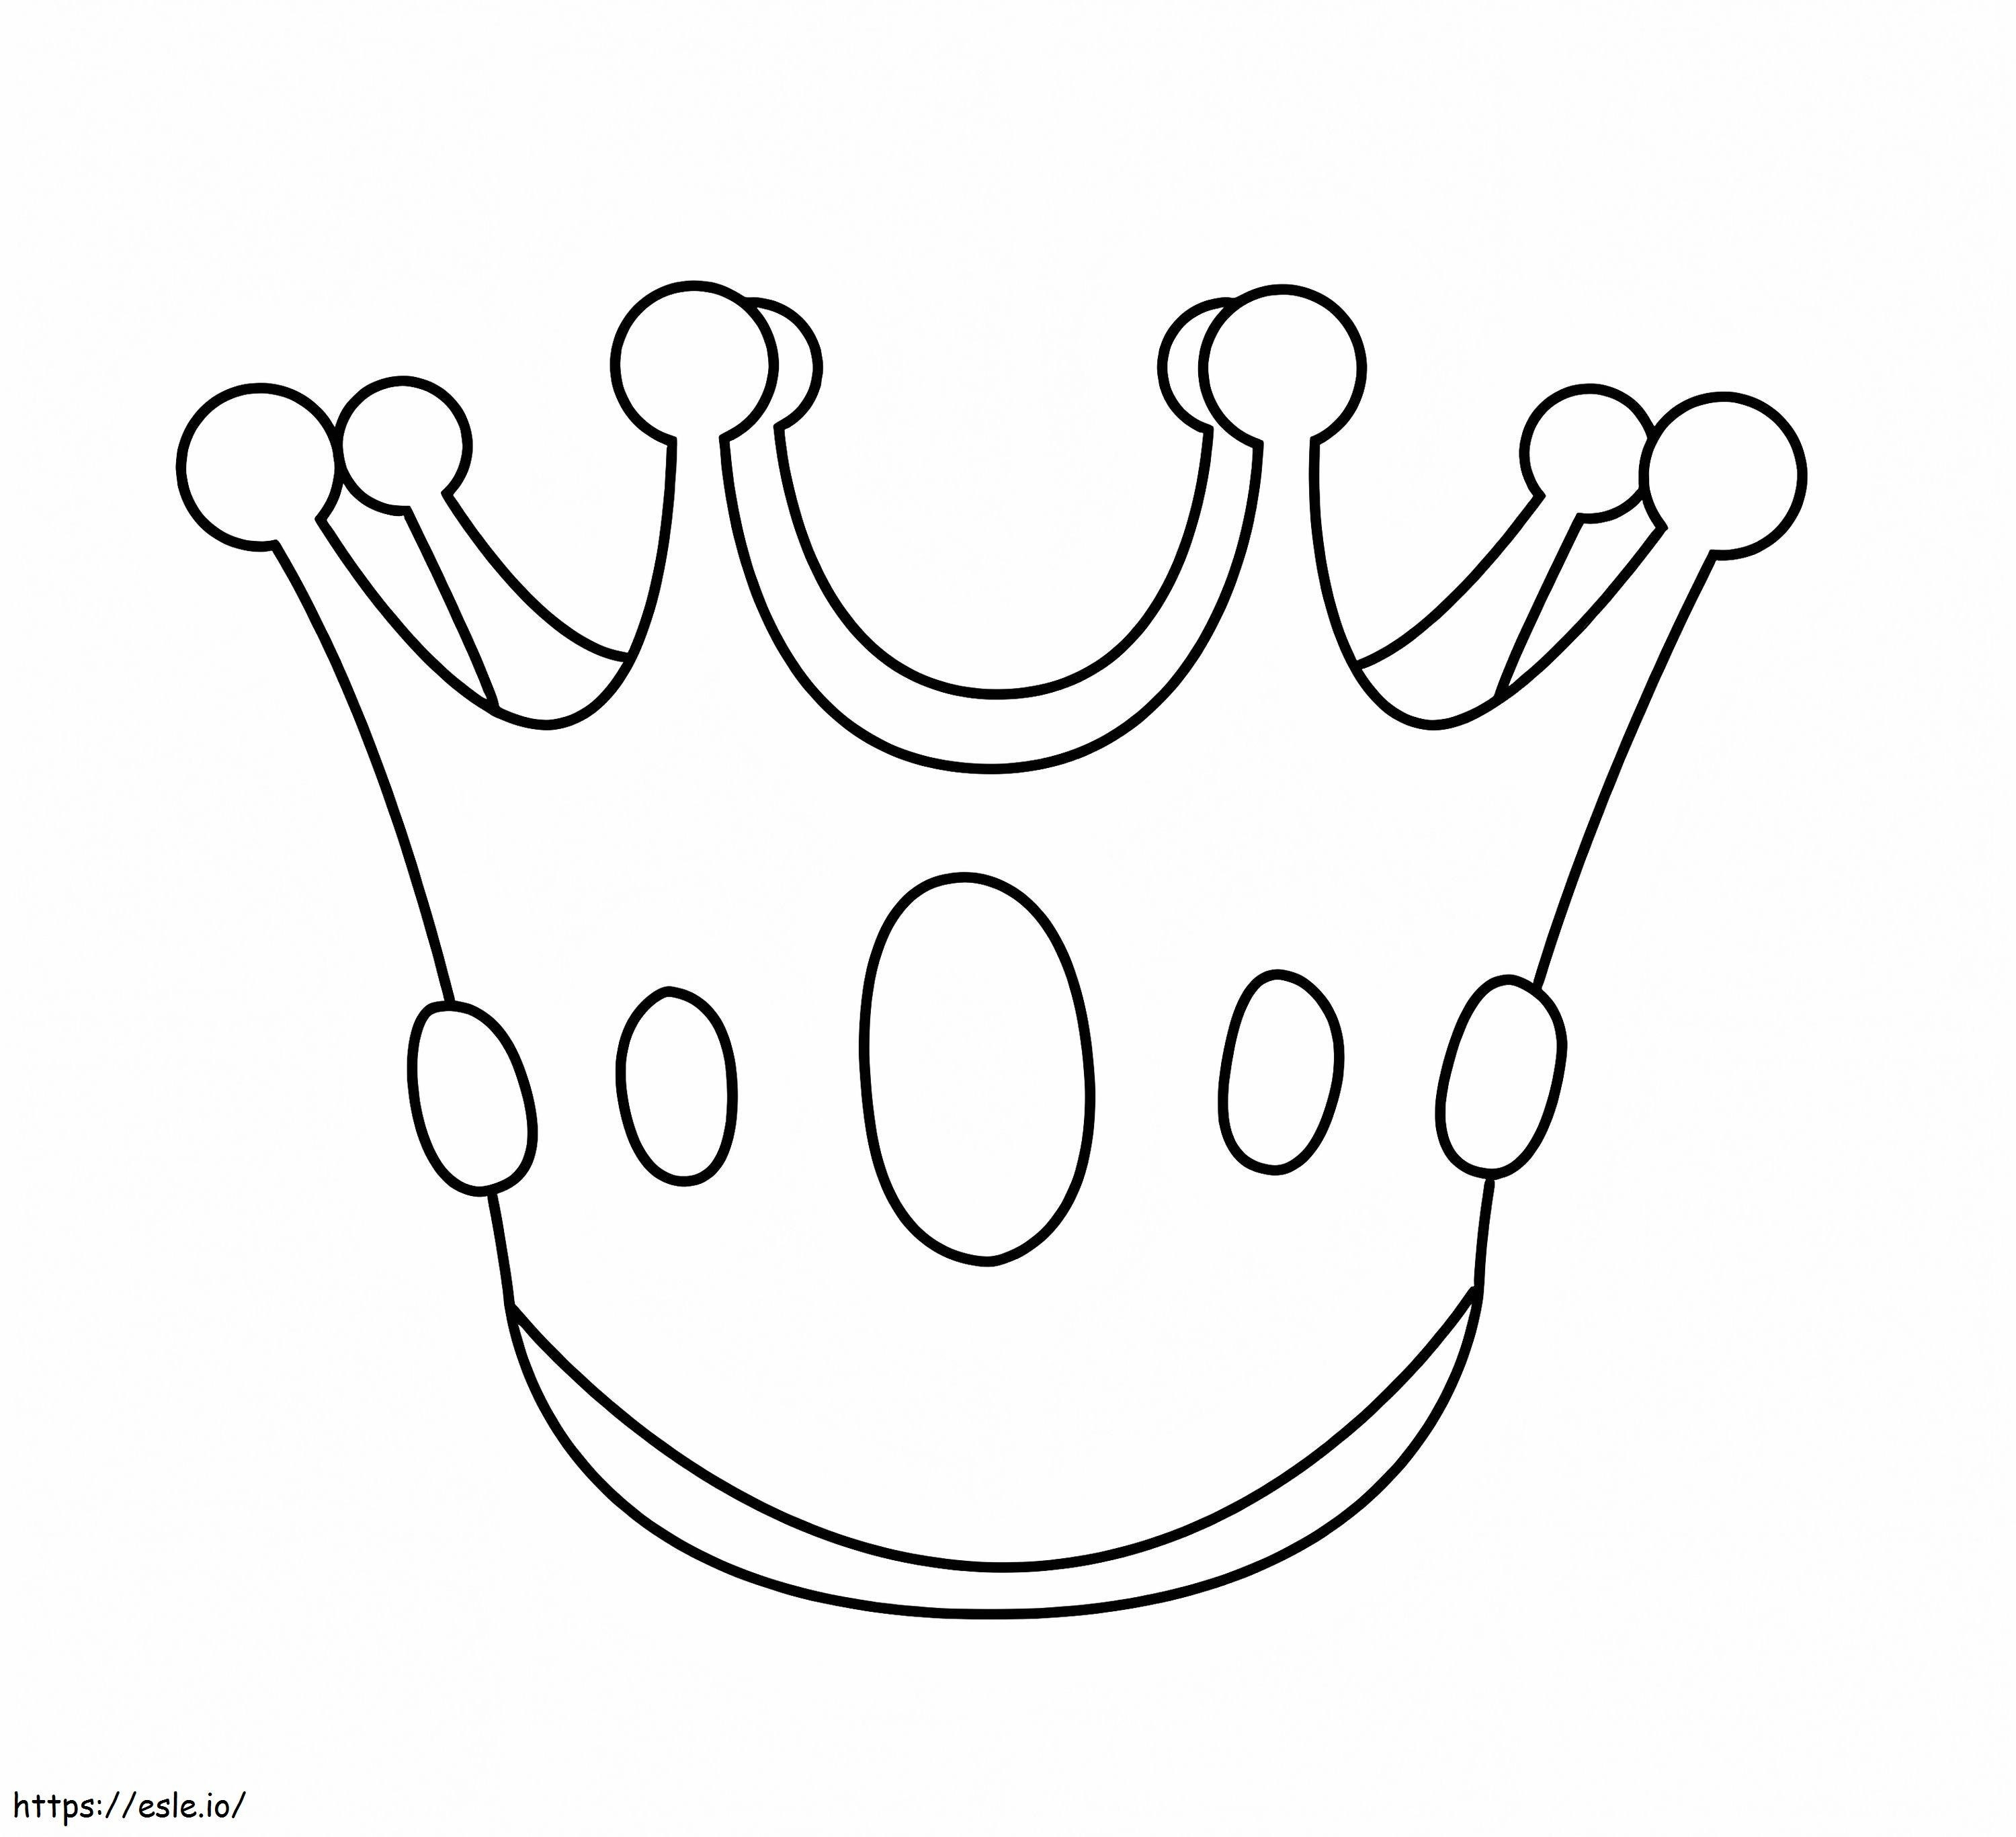 Normal Crown coloring page